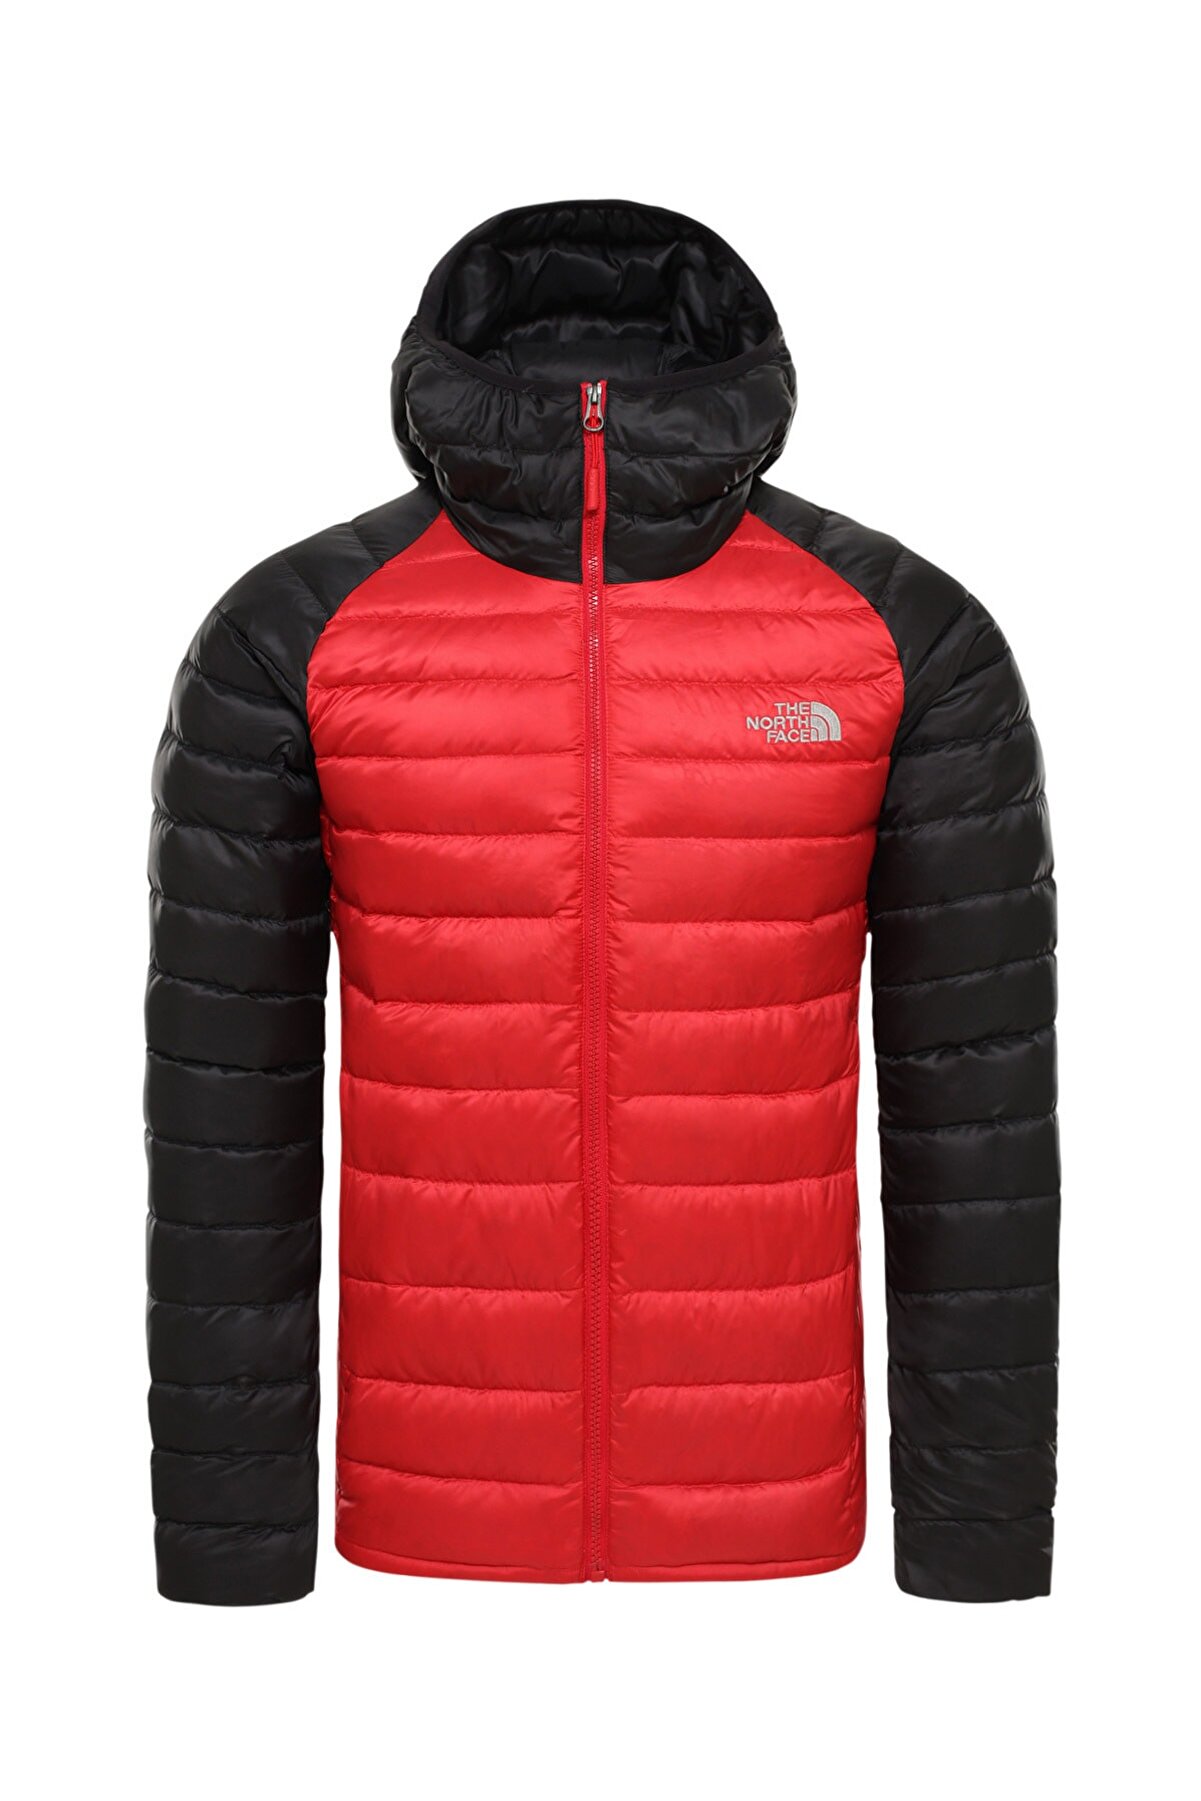 The North Face TREVAIL ERKEK OUTDOOR MONT TNF RED-TNF BLACK